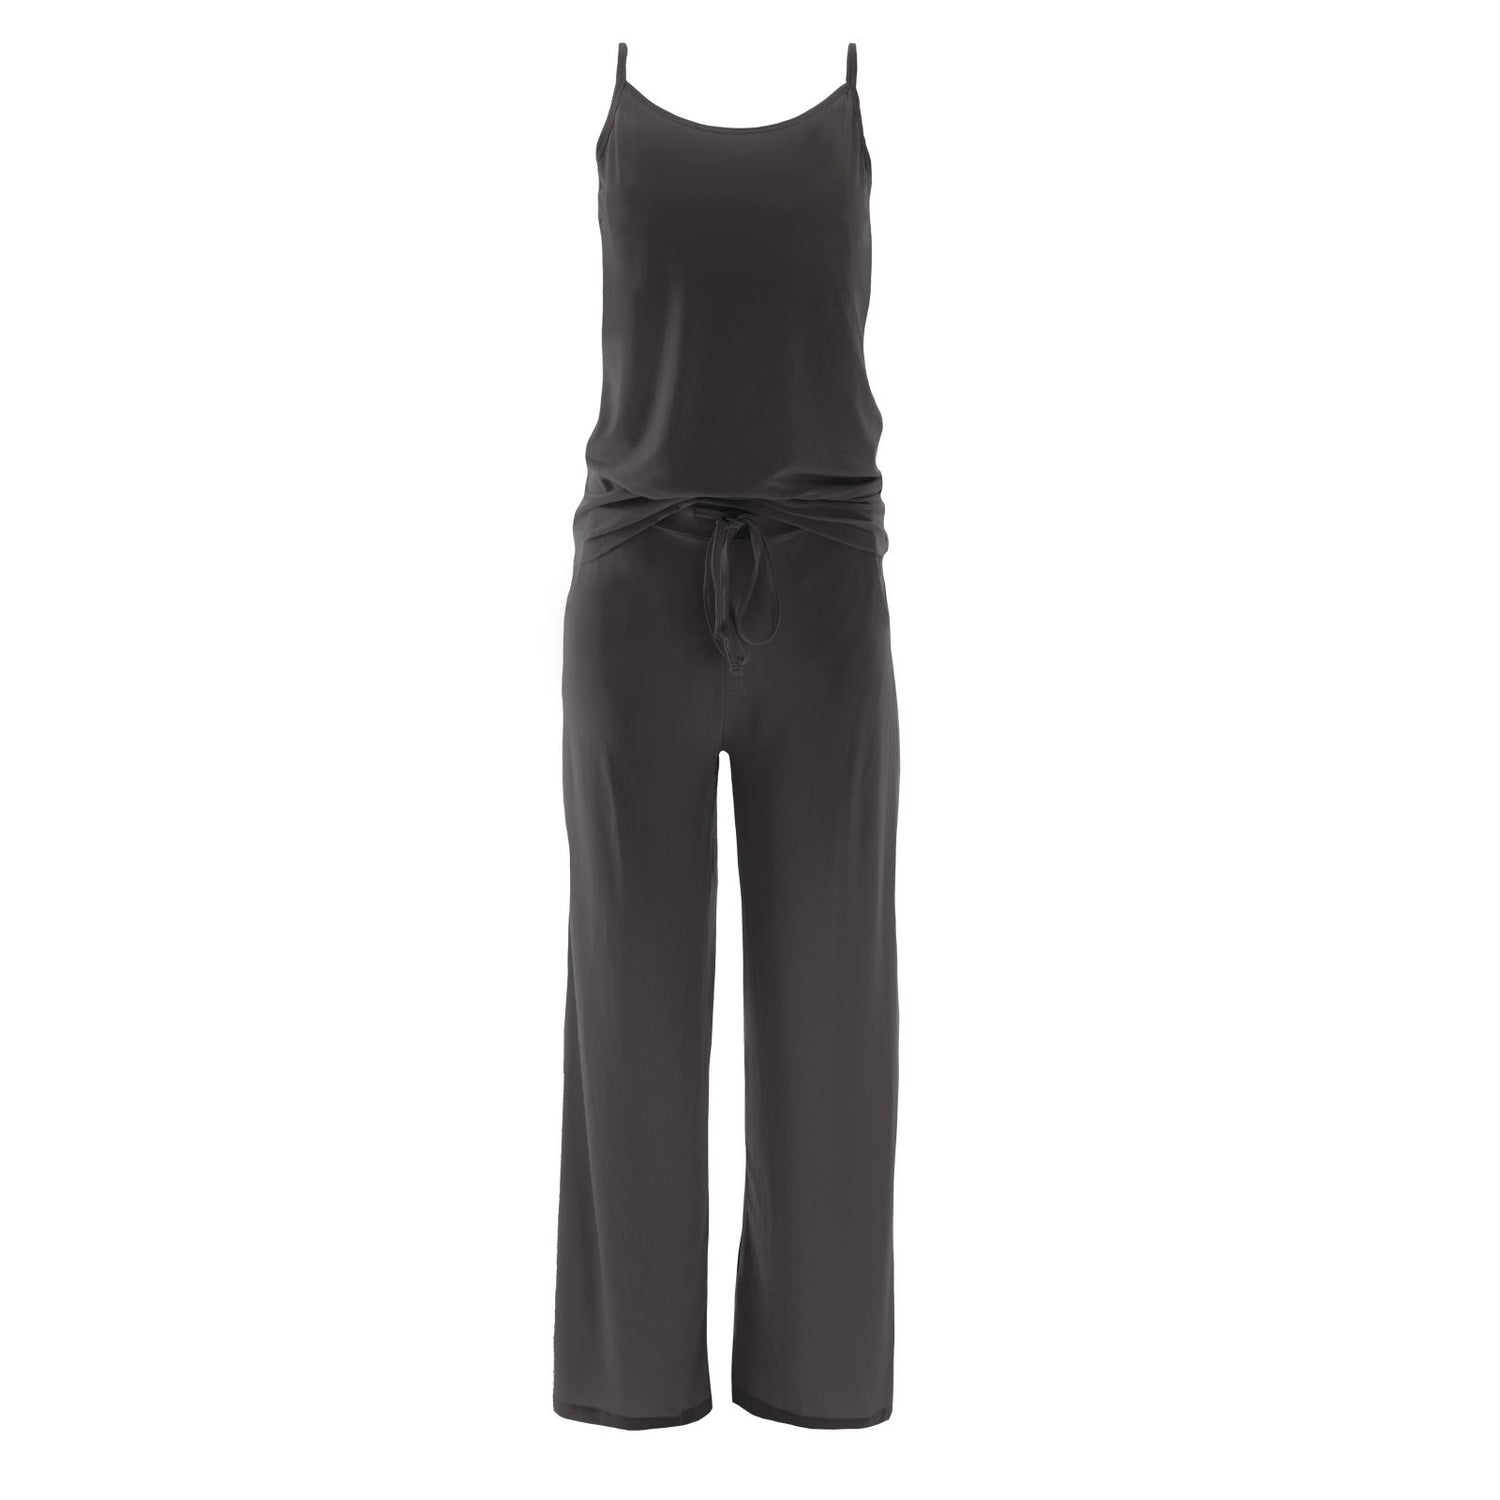 Women's Cami and Lounge Pants Pajama Set in Midnight